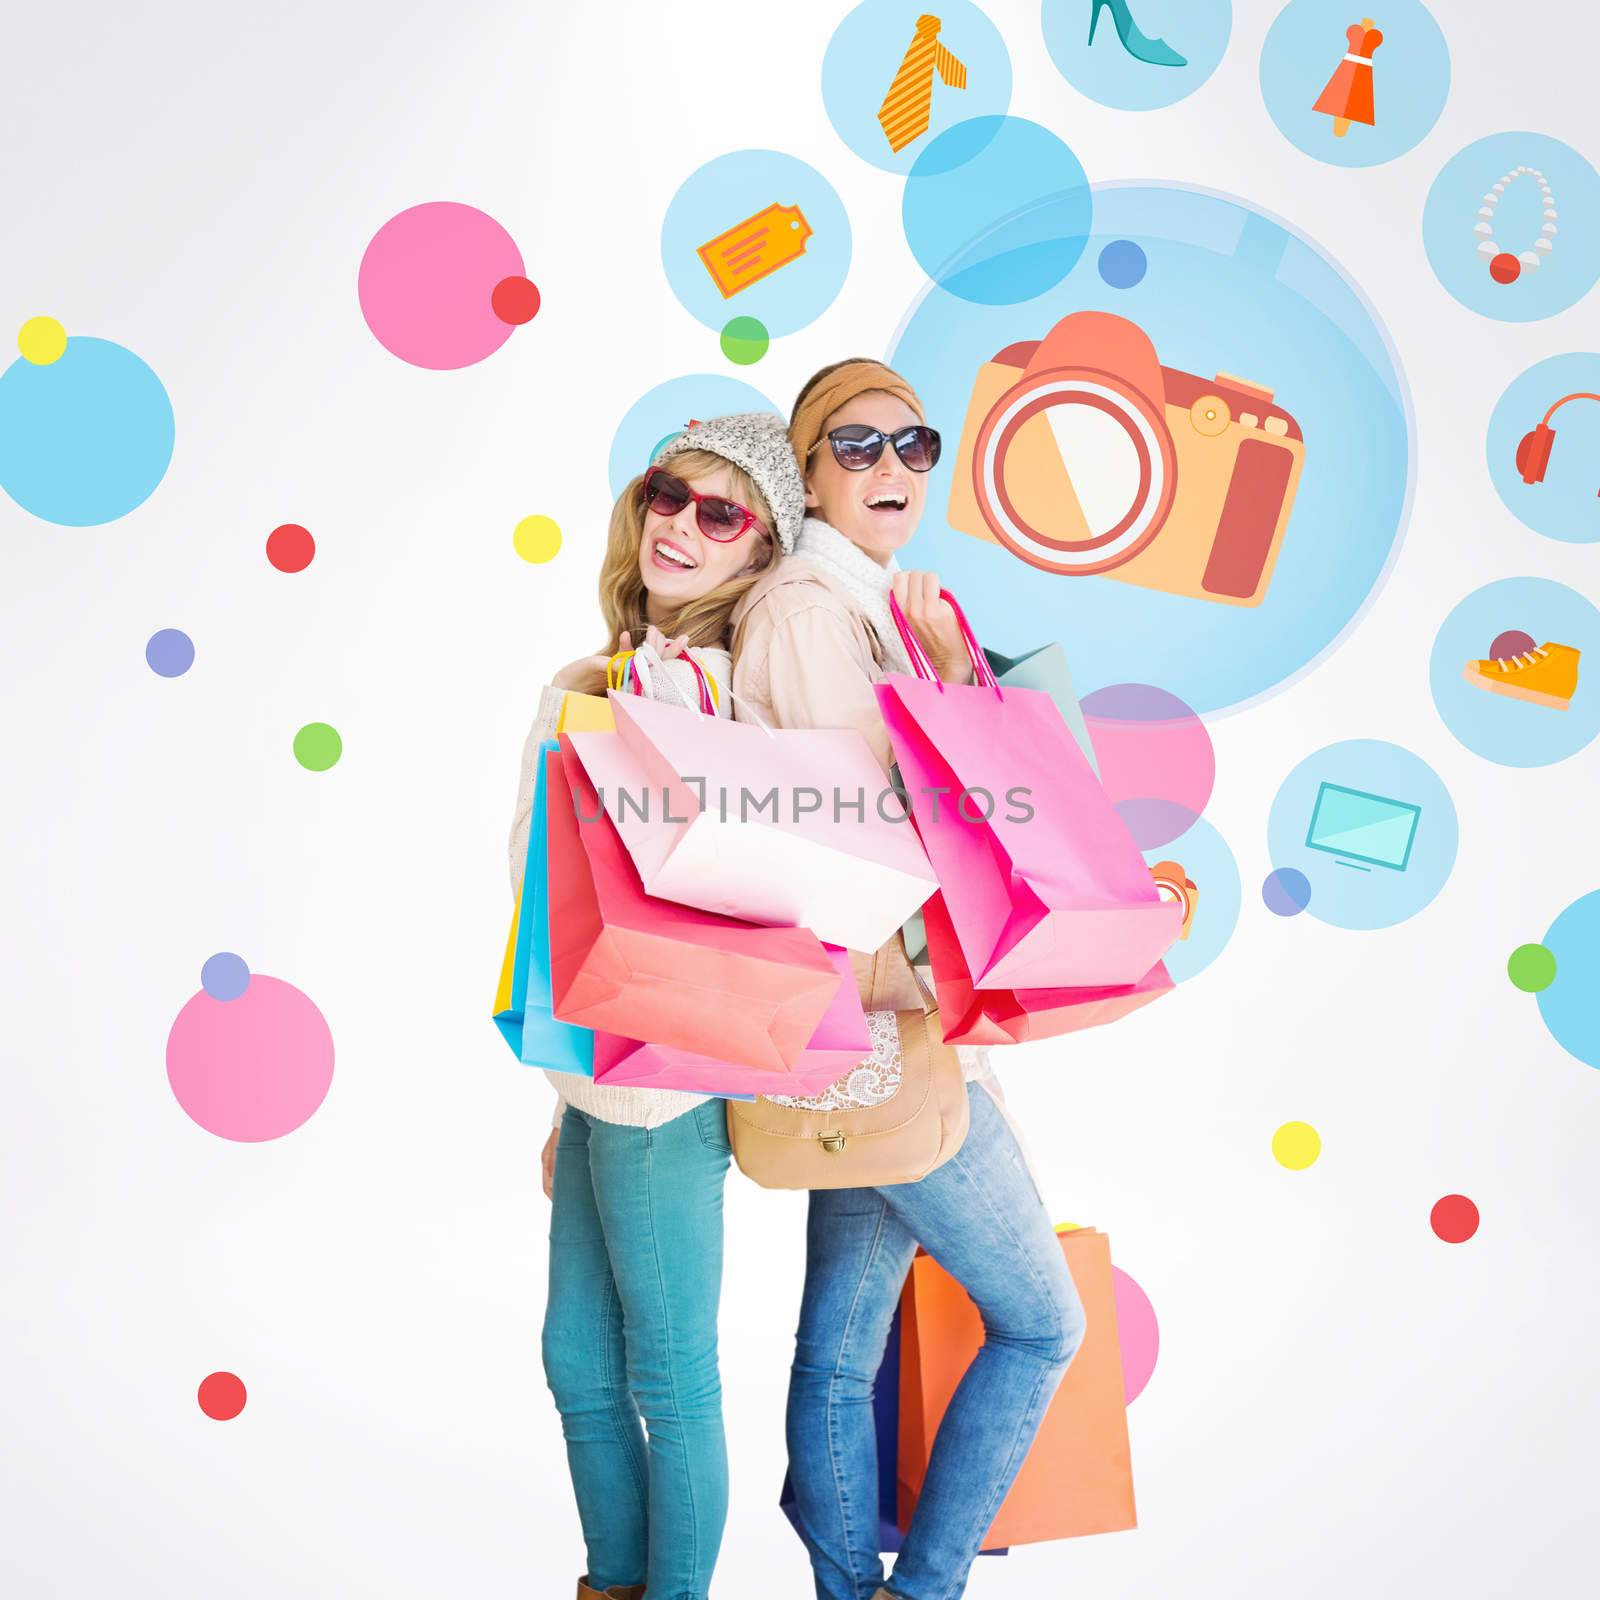 Composite image of beautiful women holding shopping bags looking at camera  by Wavebreakmedia